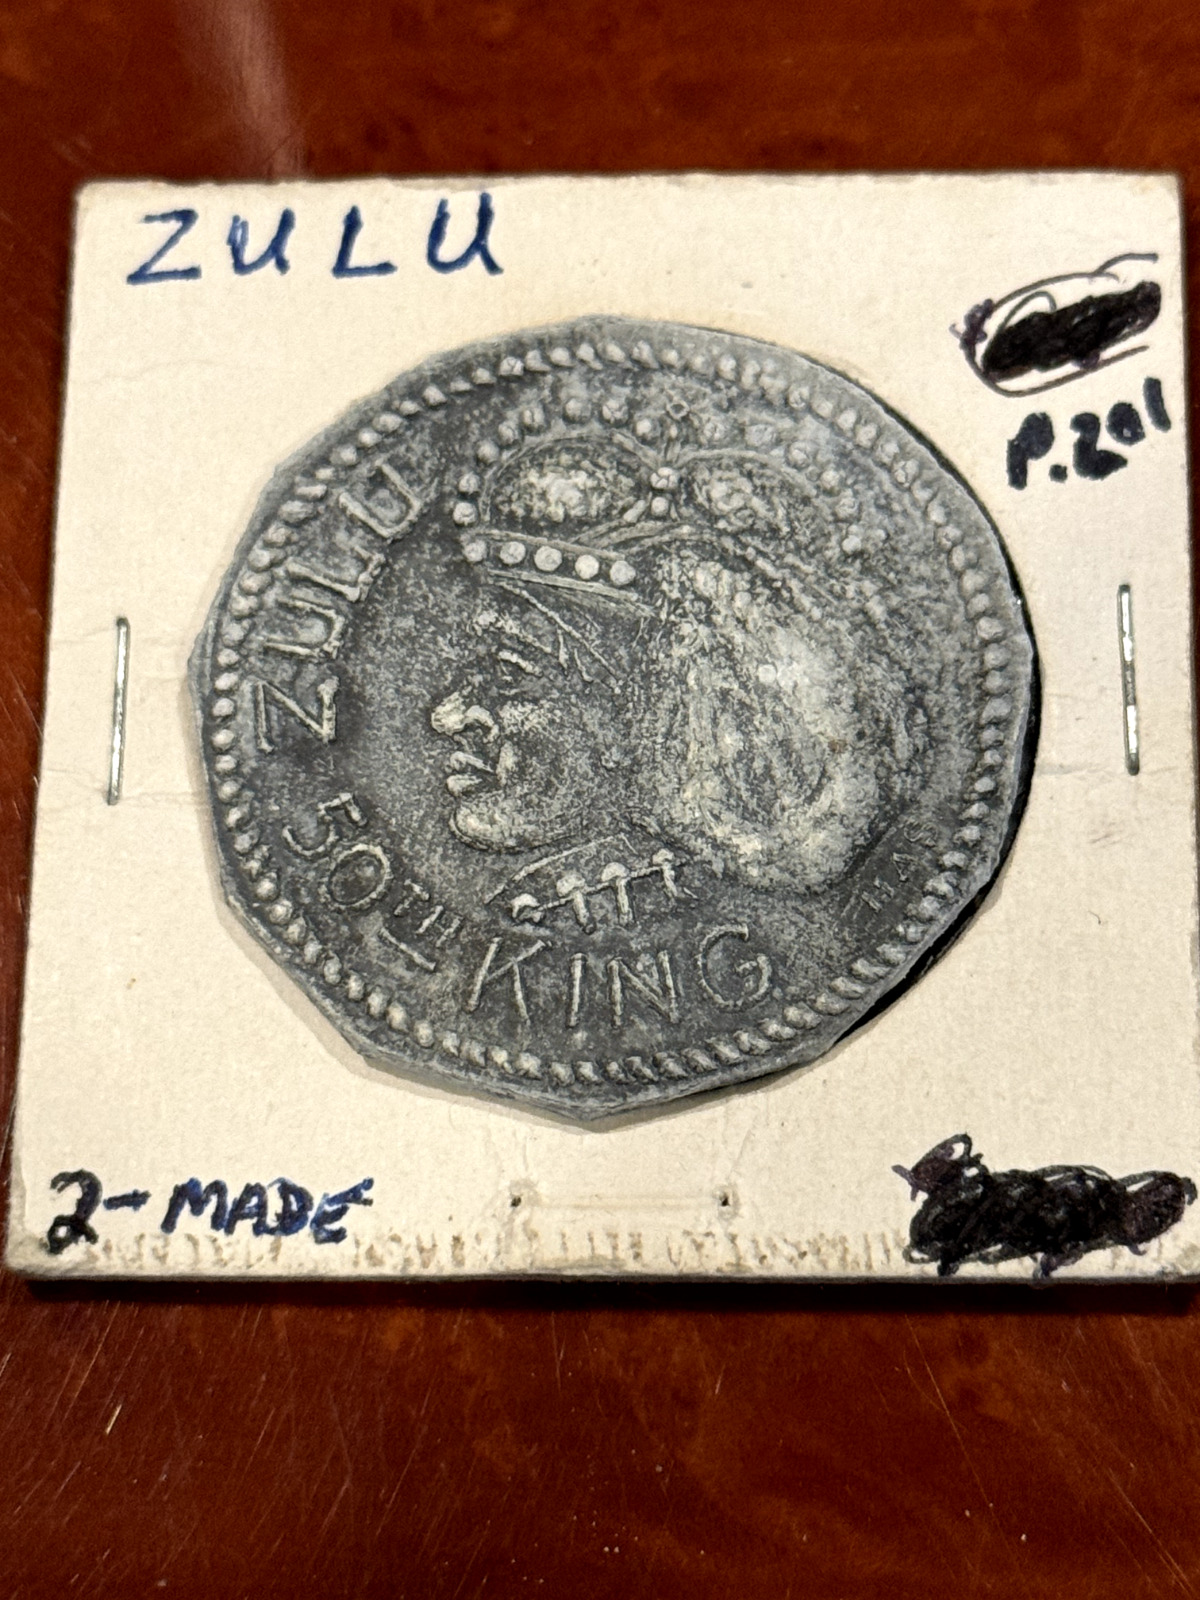 rare 1964 Zulu HAS 2-sided lead Test Strike of Leather doubloon H. Alvin Sharpe